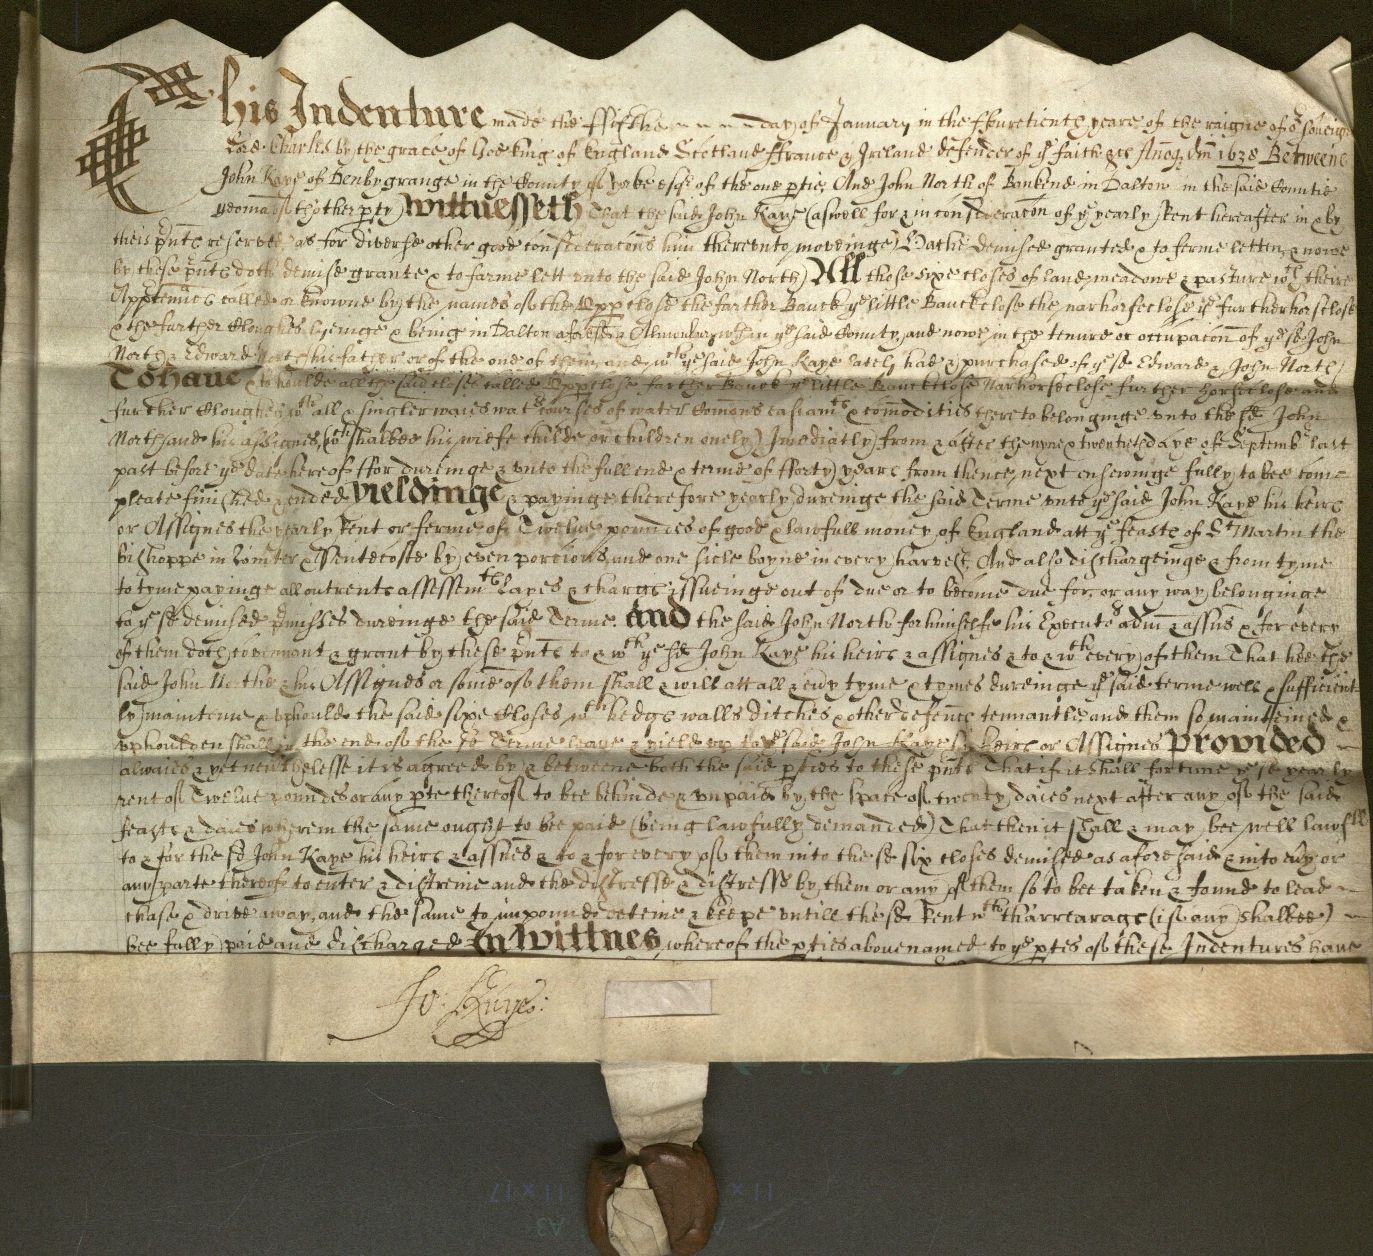 Image of a lease indenture from the Kaye Family Estate Papers, 1639